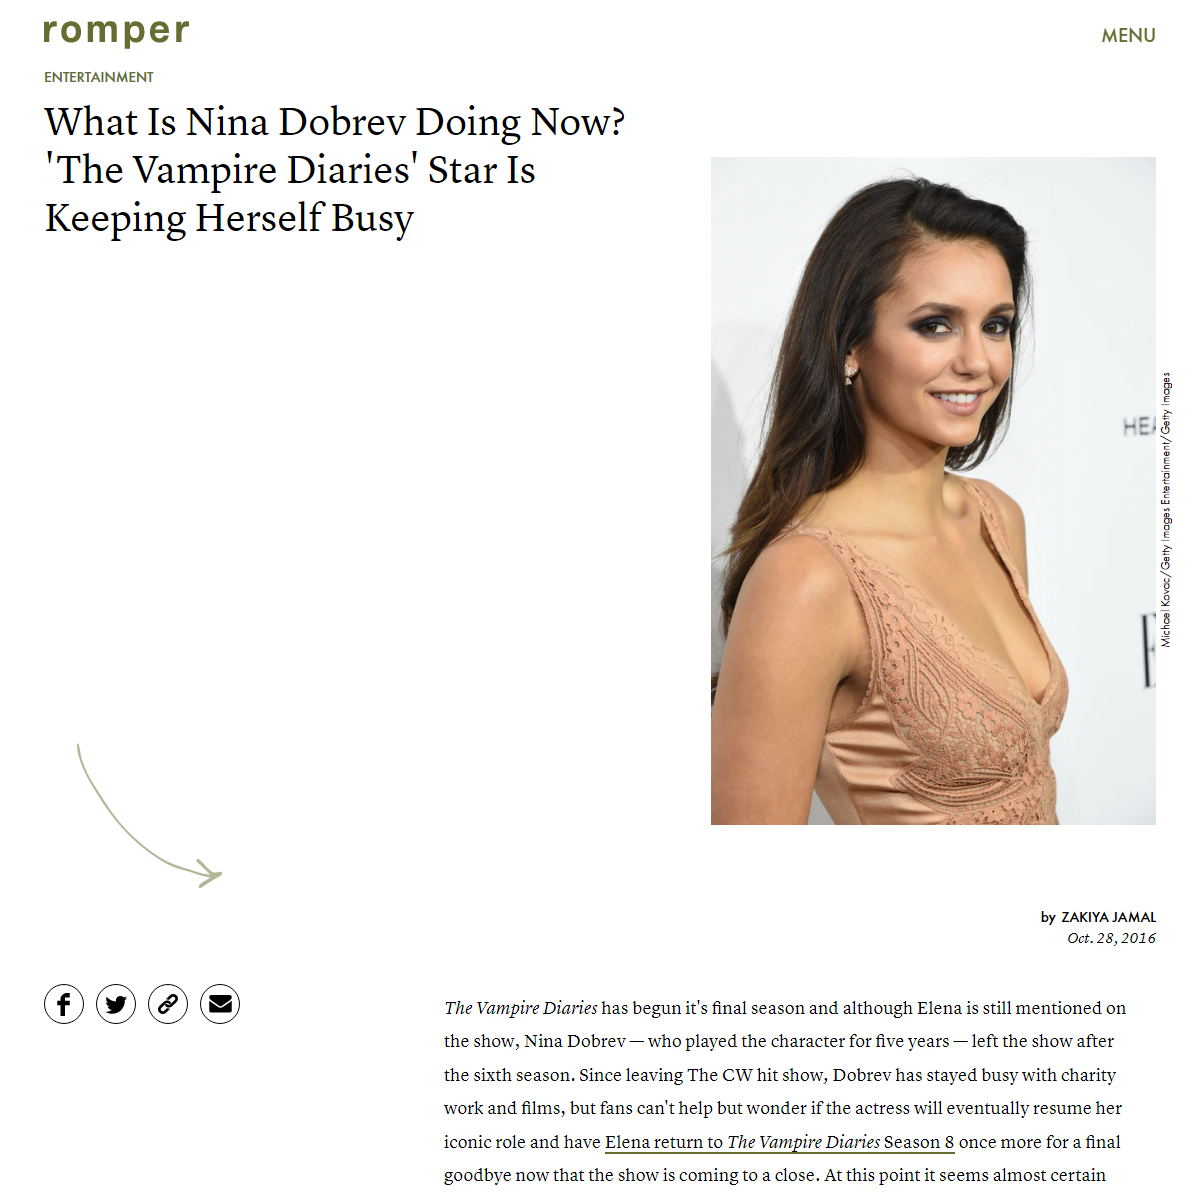 A complete backup of https://www.romper.com/p/what-is-nina-dobrev-doing-now-the-vampire-diaries-star-is-keeping-herself-busy-213